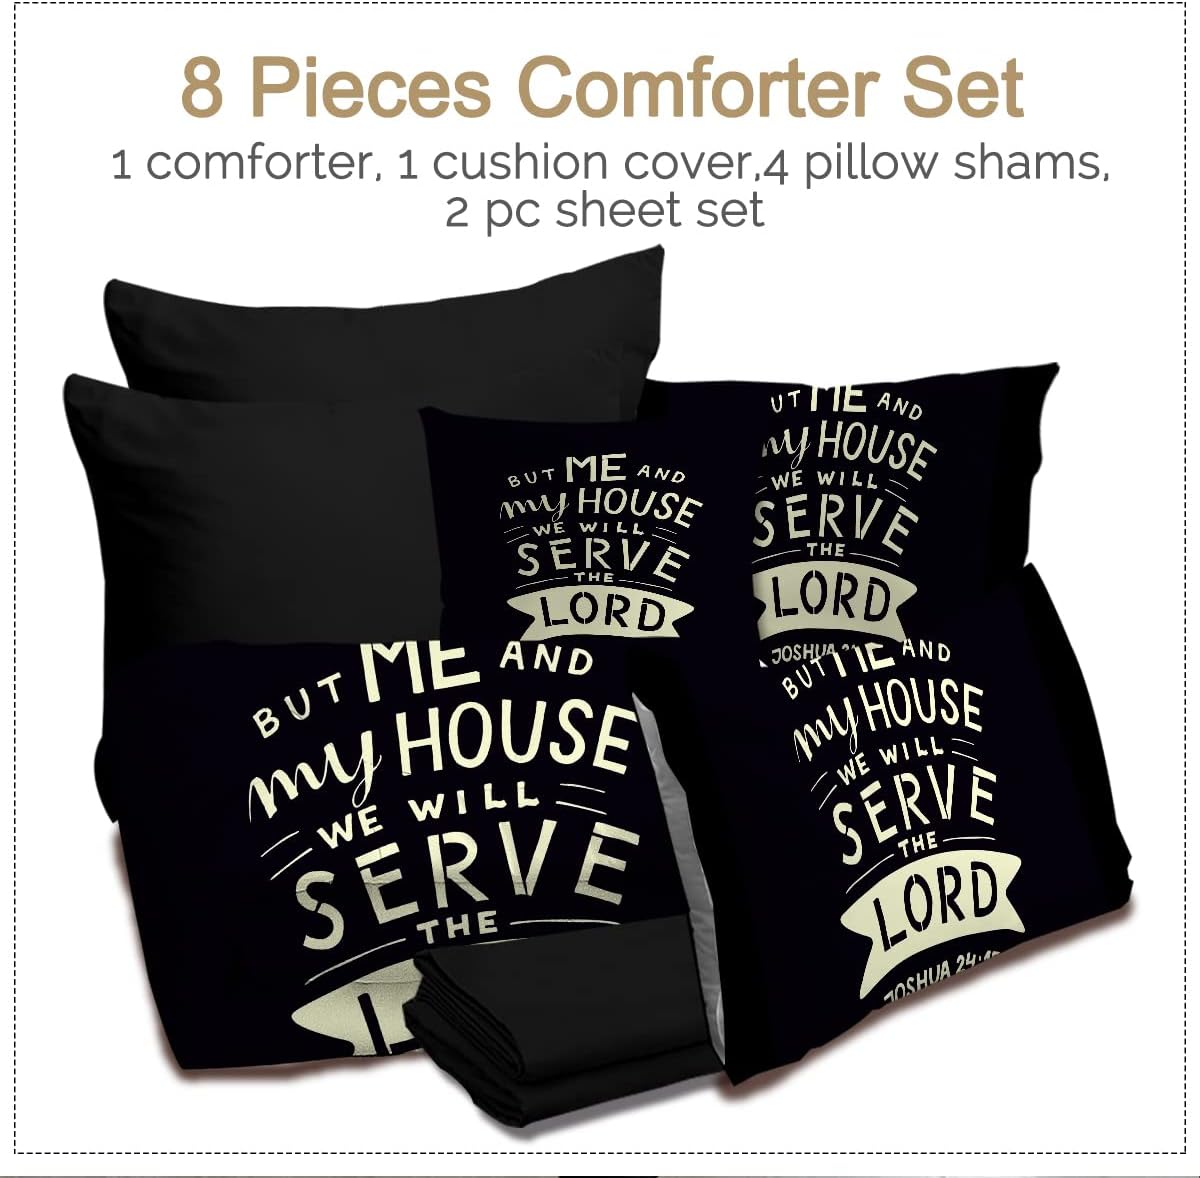 But Me & My House We Will Serve The Lord Christian Comforter Set claimedbygoddesigns